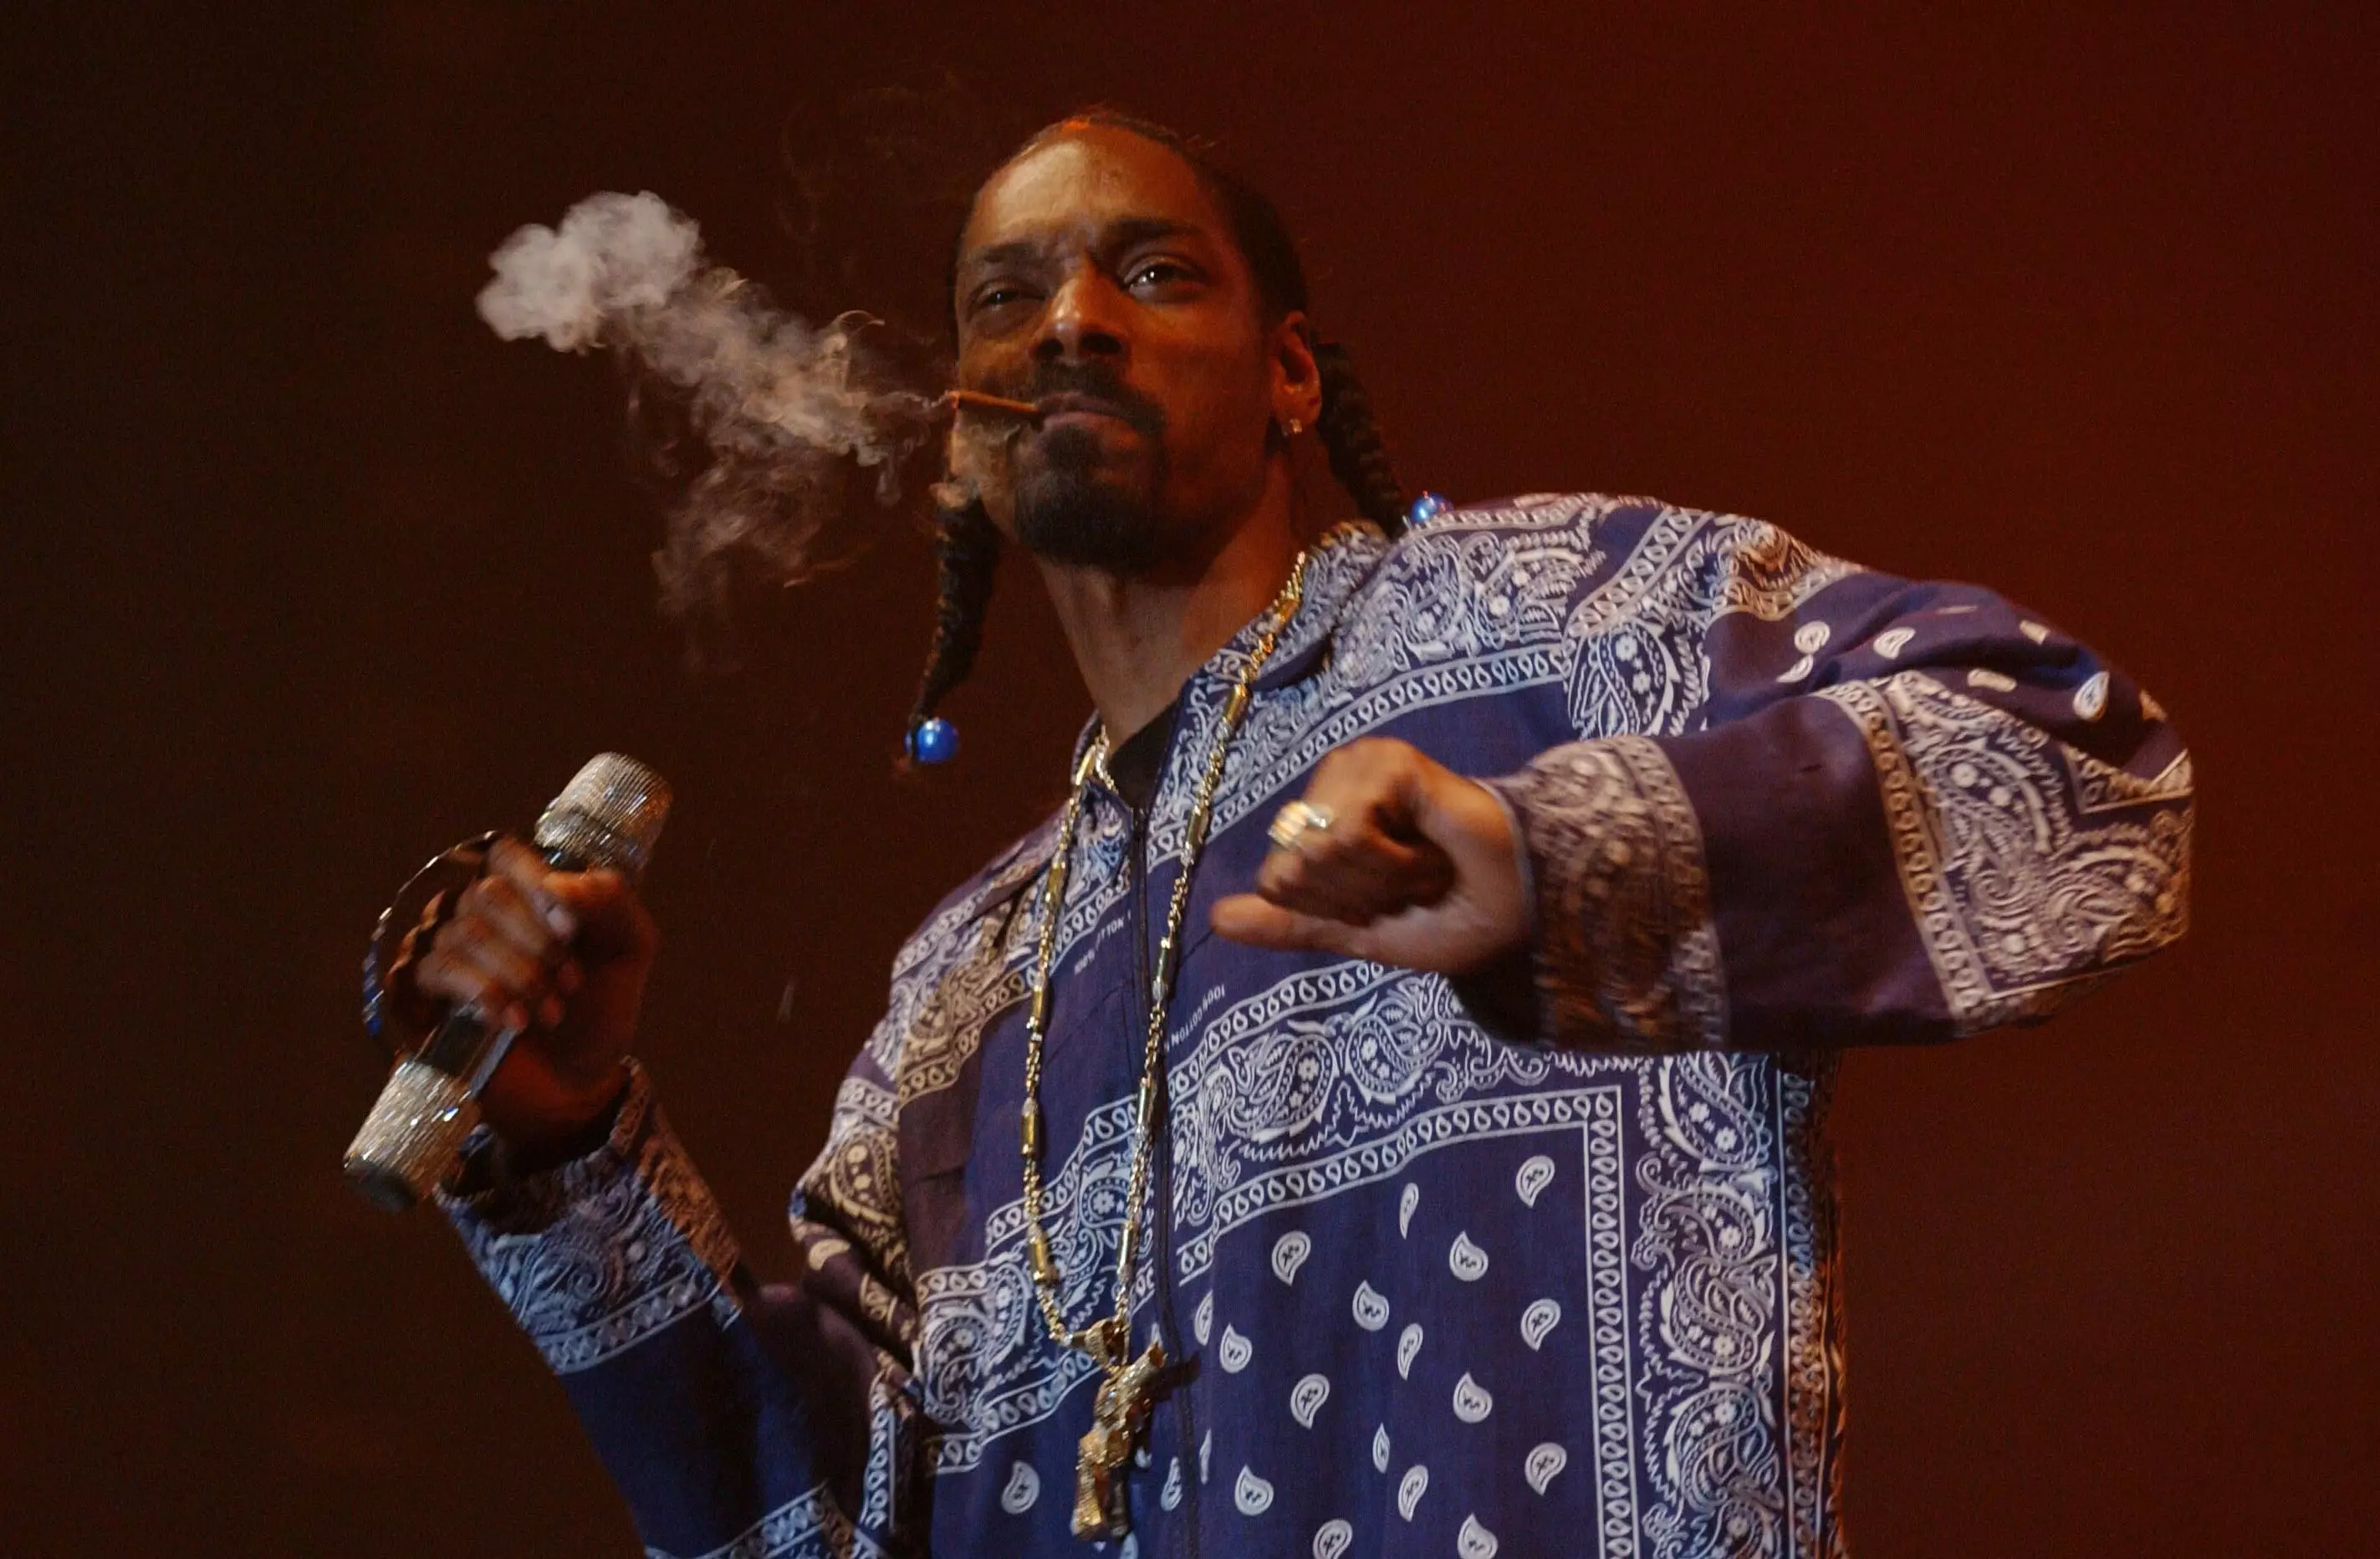 Snoop Dogg pays a handsome salary to have his blunts on demand.